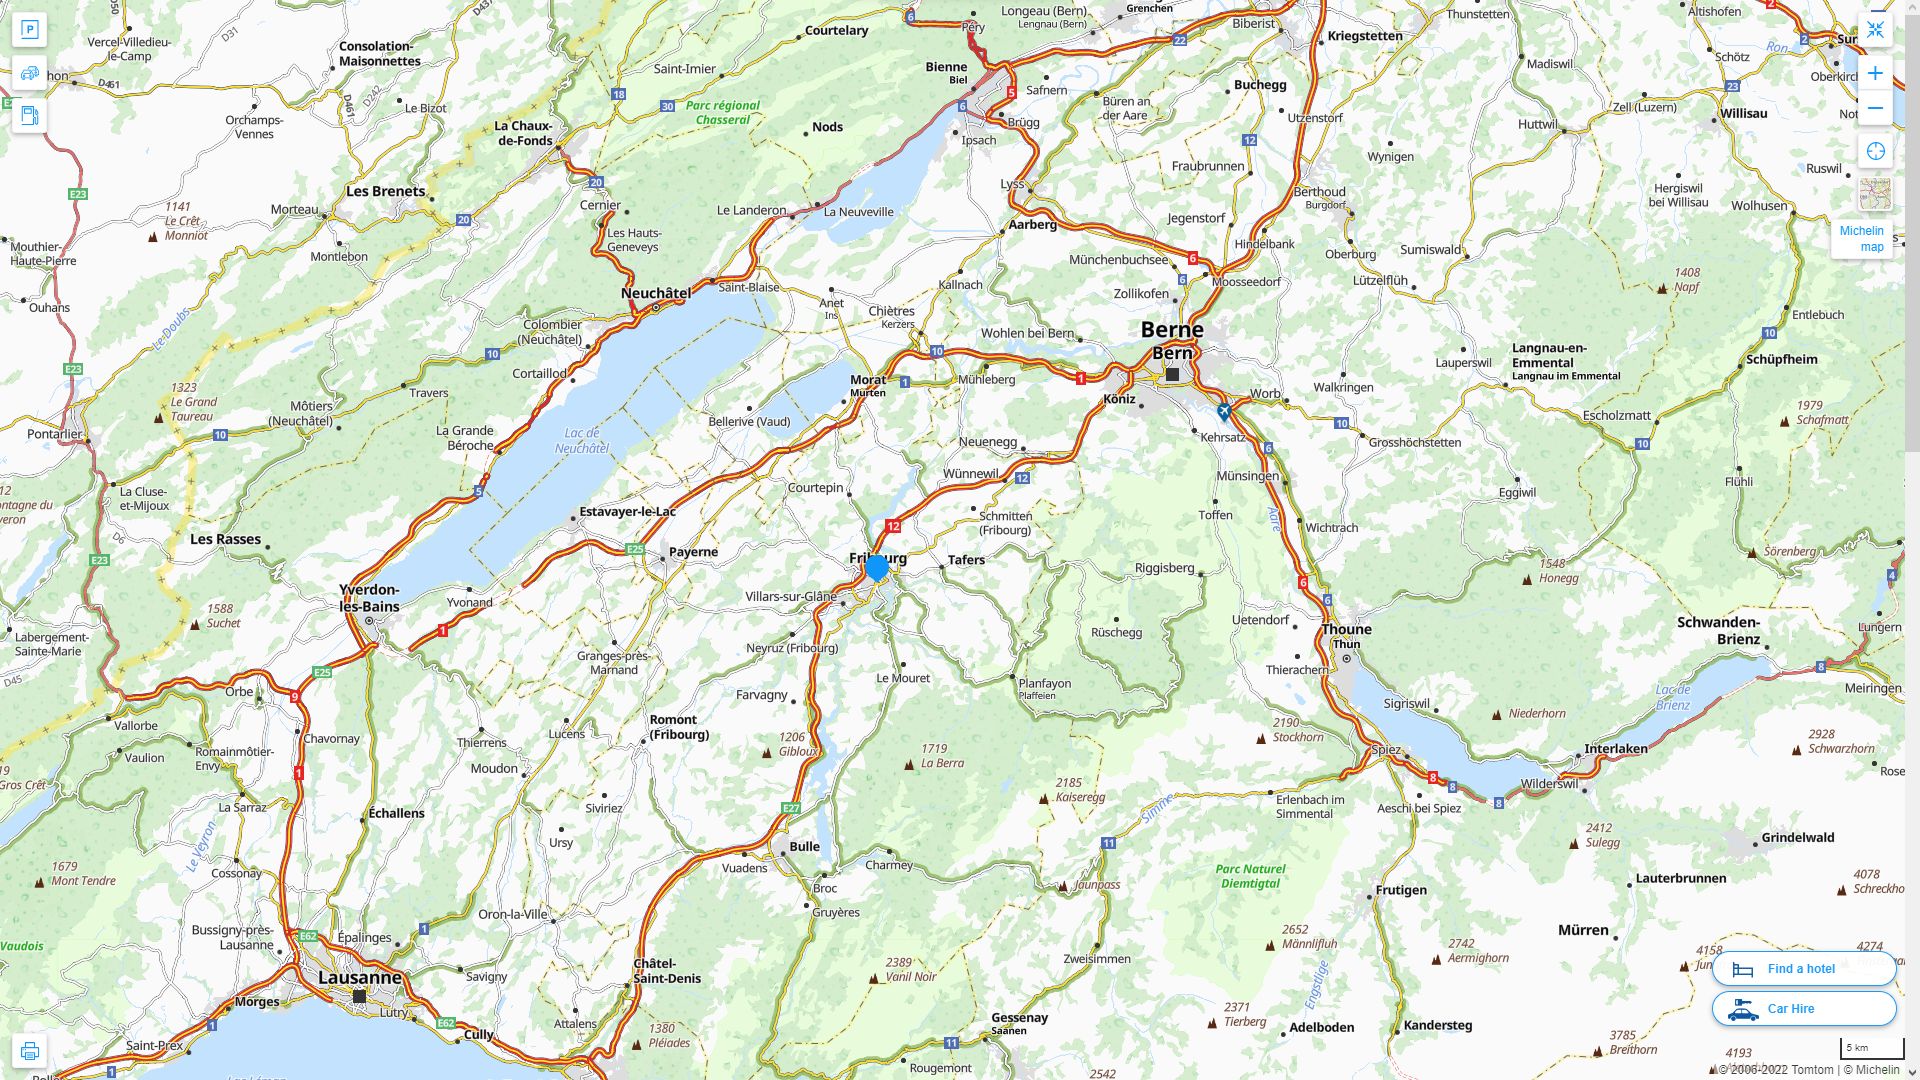 Fribourg Highway and Road Map